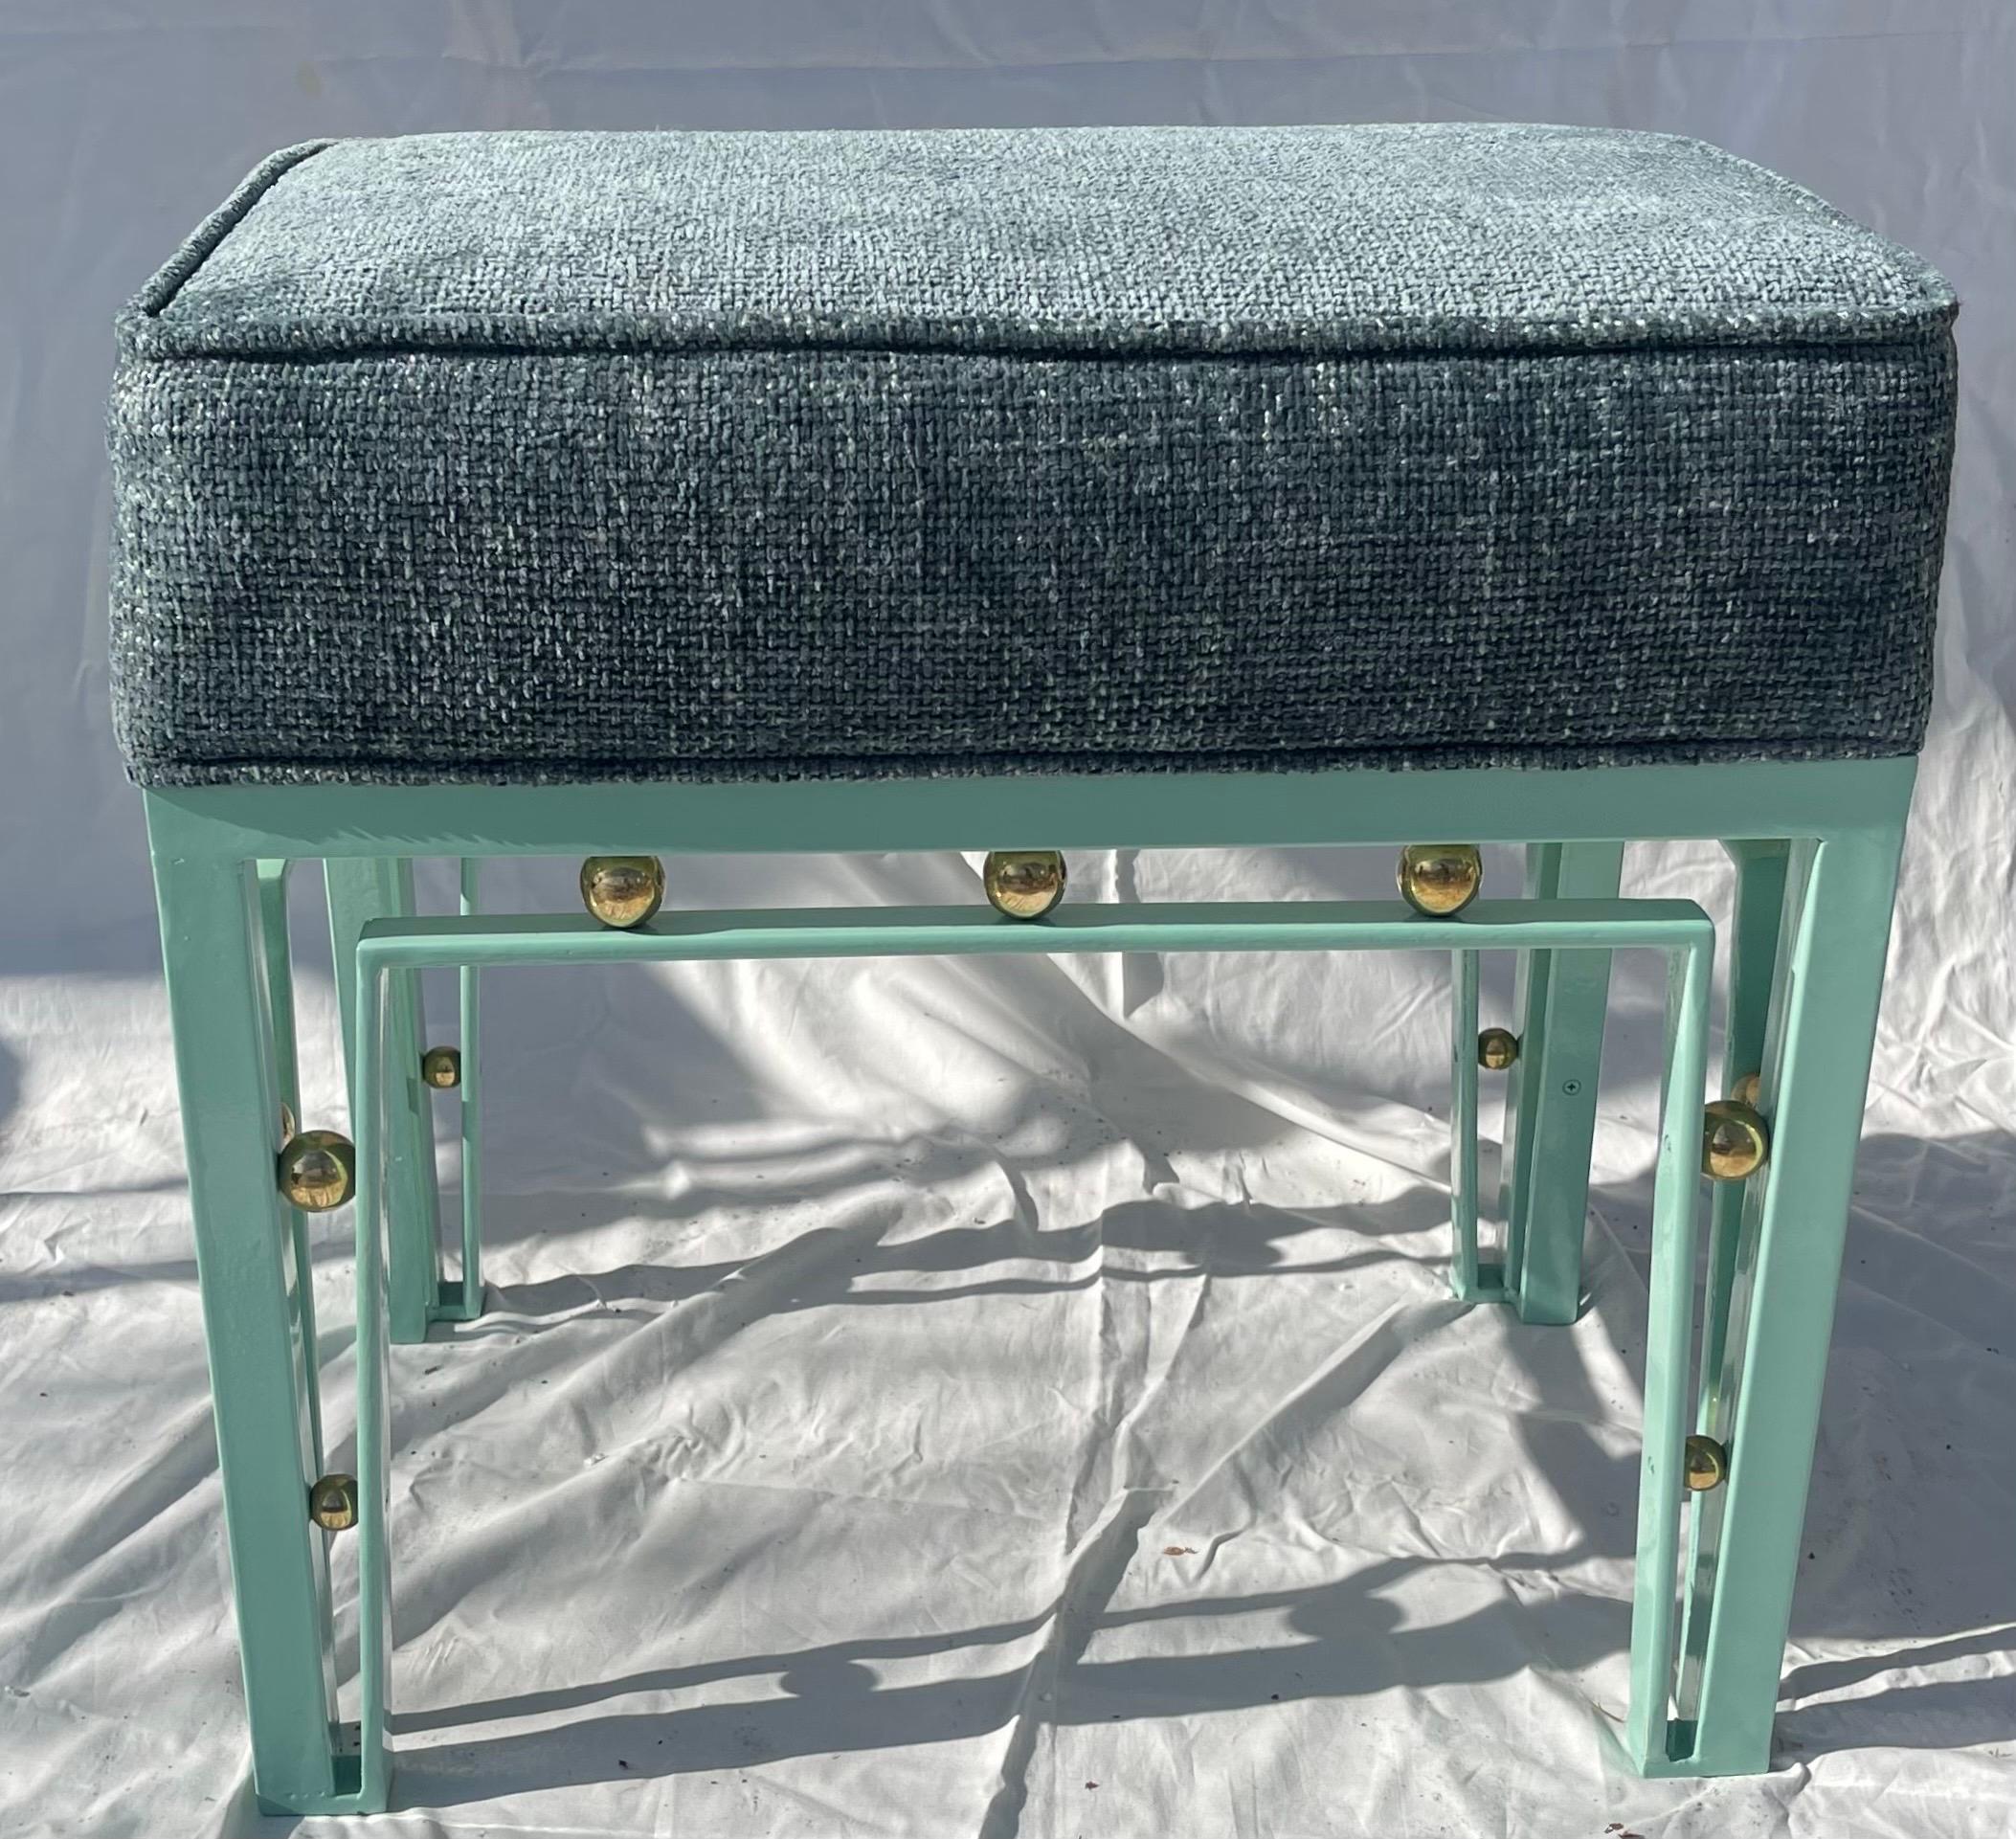 A Wonderful Pair Of Sea Foam Green Enamel And Brass Ball Accented Benches With Green Upholstery

Two Benches Available
Each Sold Separately